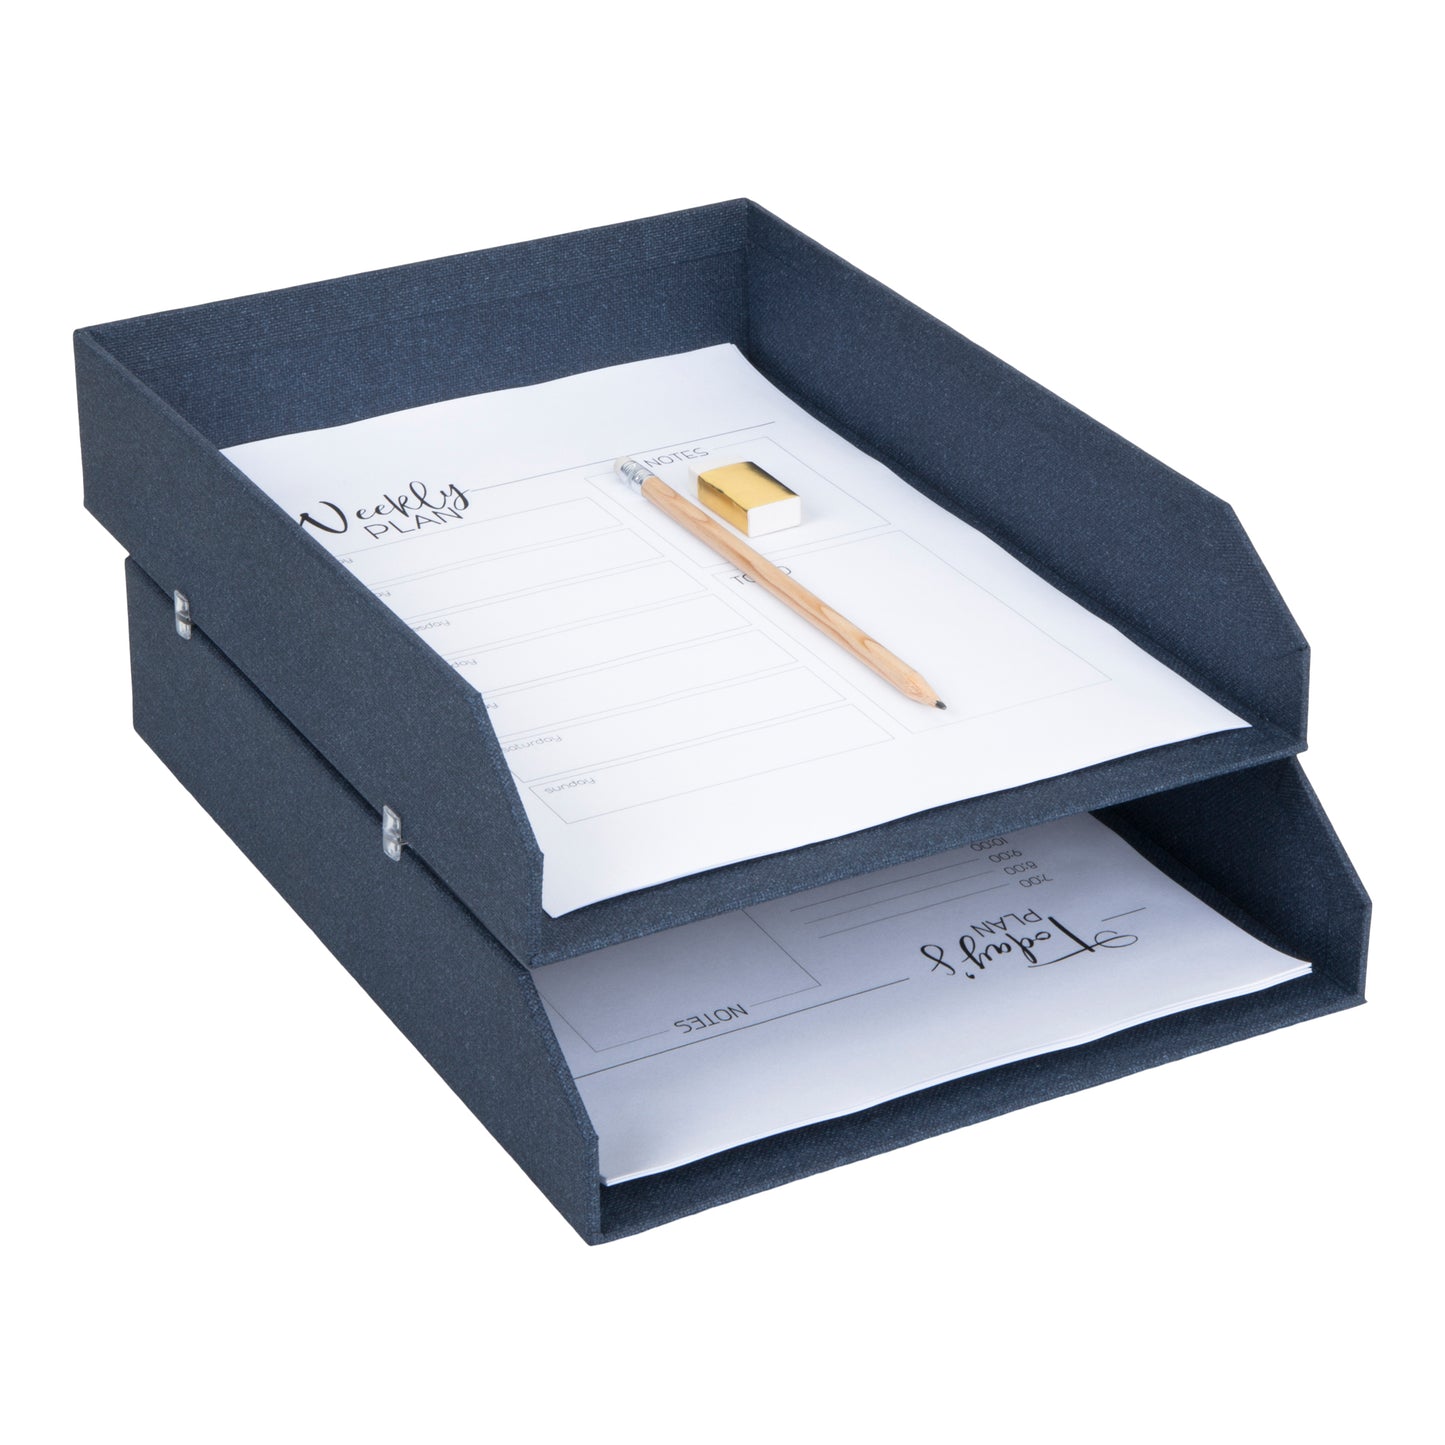 Bigso Hakan Blue Stackable Canvas Letter Organizer Trays for A4 or Letter Size Documents Pack of 2, 9.1” x 12.2” x 2.4"